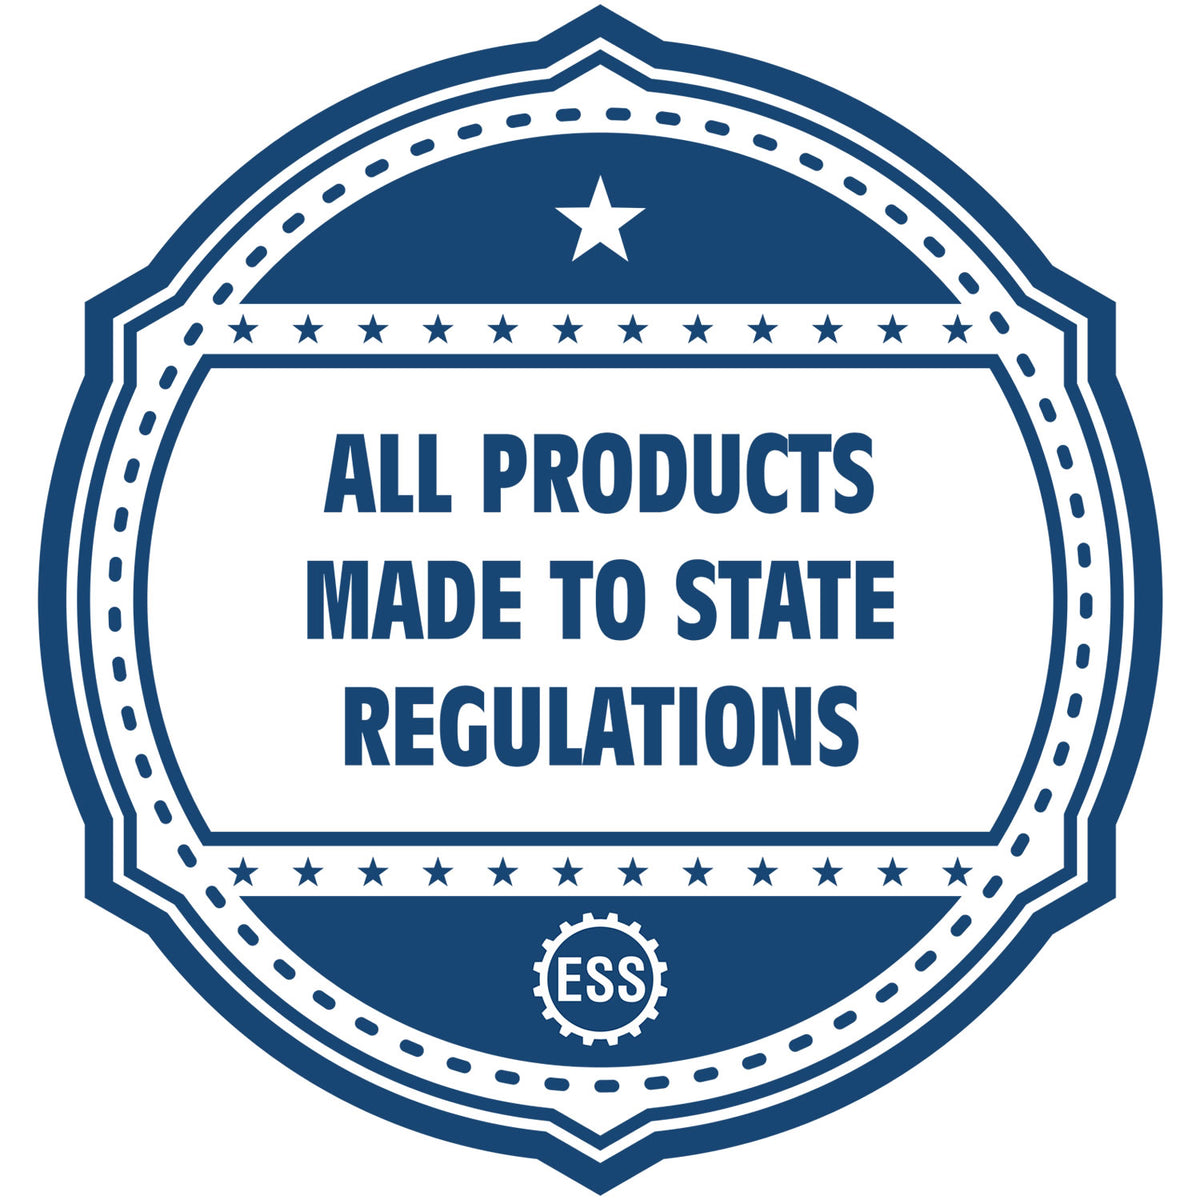 A blue icon or badge for the Gift Tennessee Geologist Seal showing that this product is made in compliance with state regulations.